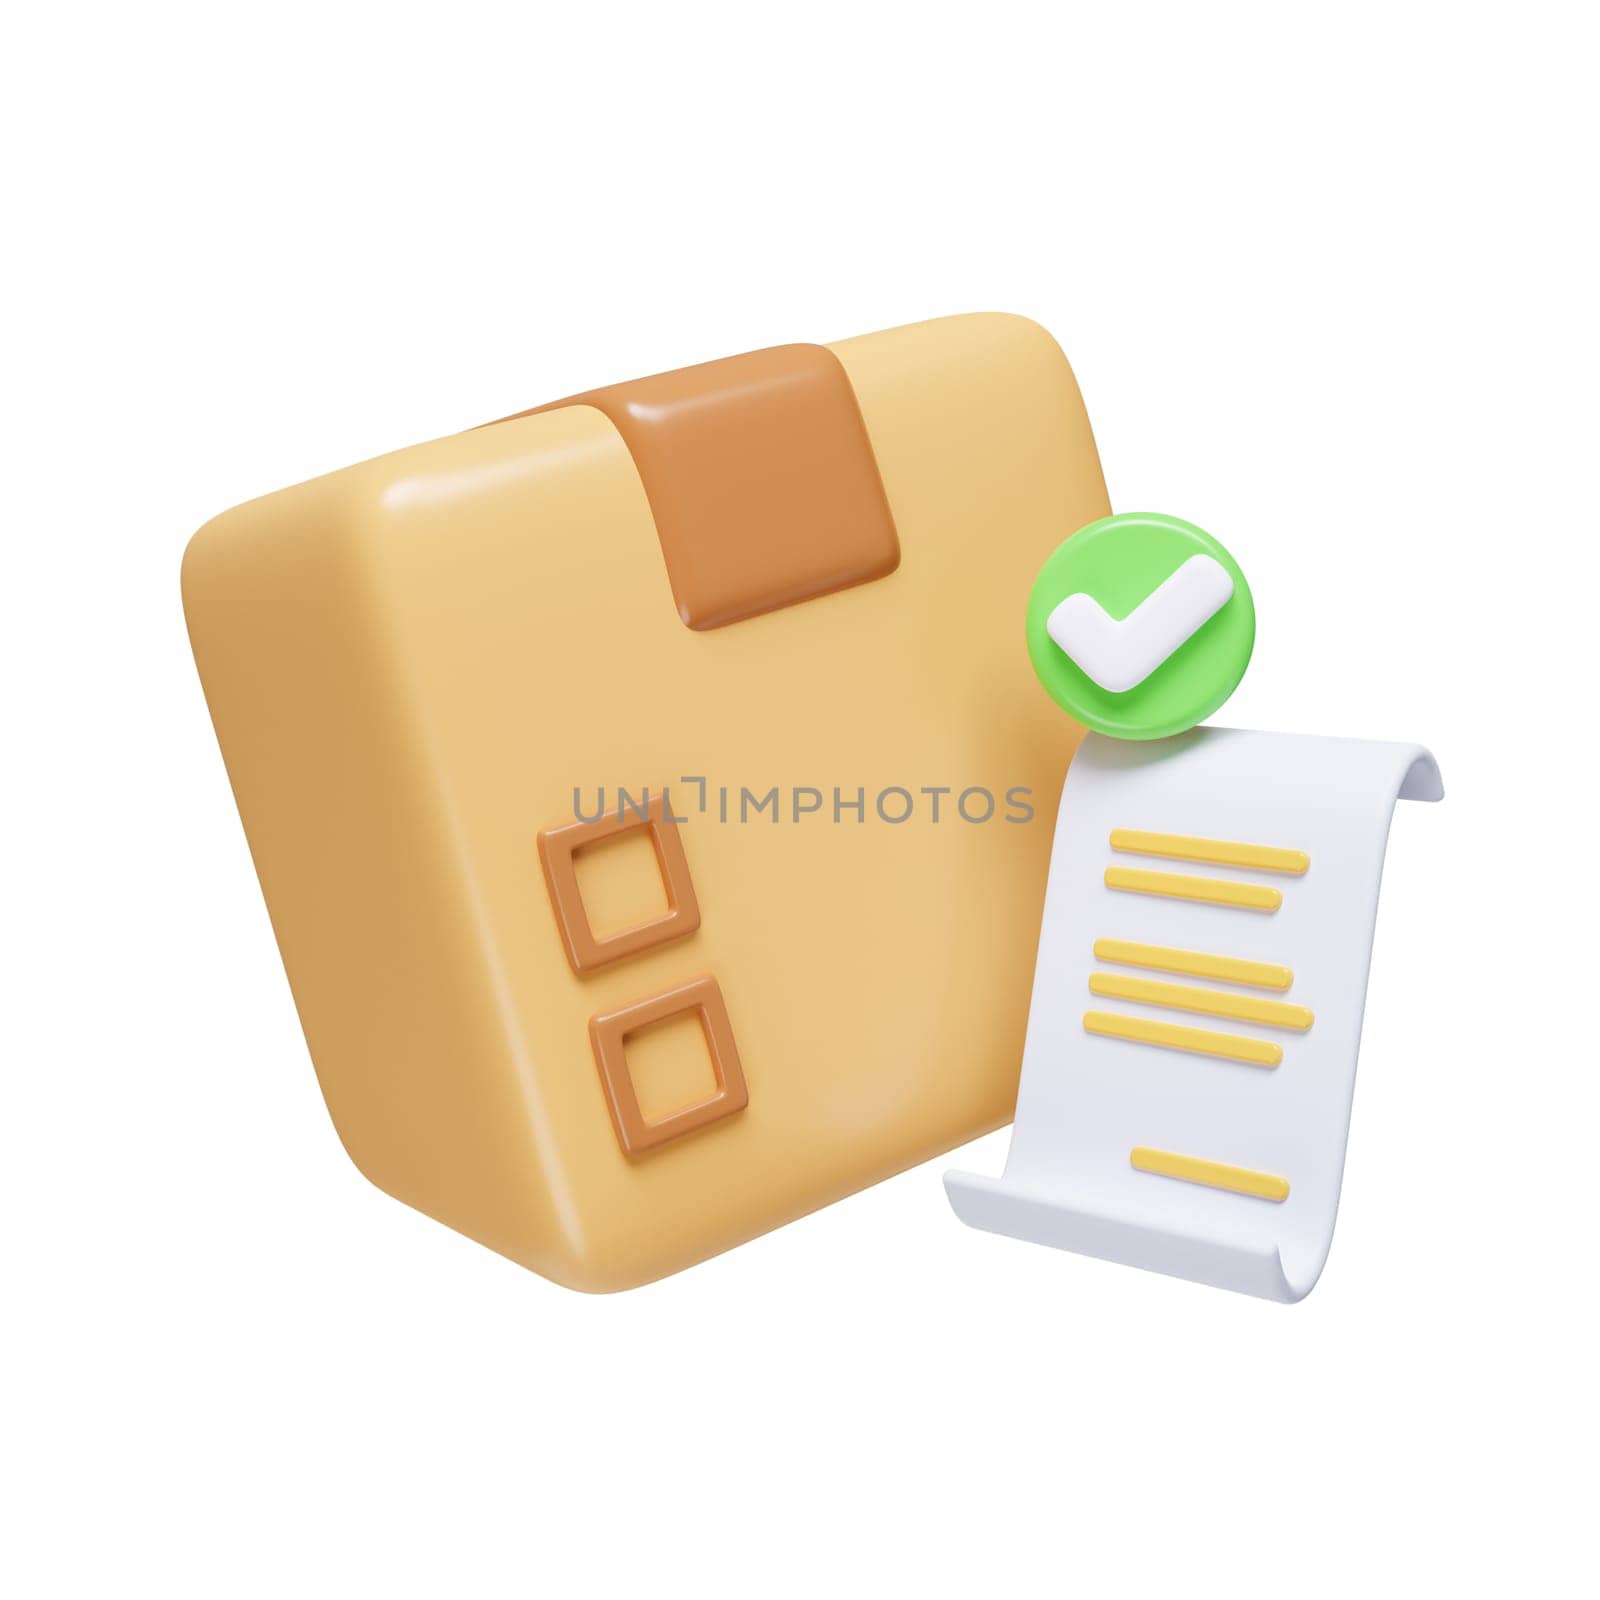 Delivery package check mark and receipt. Shipping box and cardboard box. safe delivery. successfully delivered. icon isolated on white background. 3d rendering illustration. Clipping path. by meepiangraphic